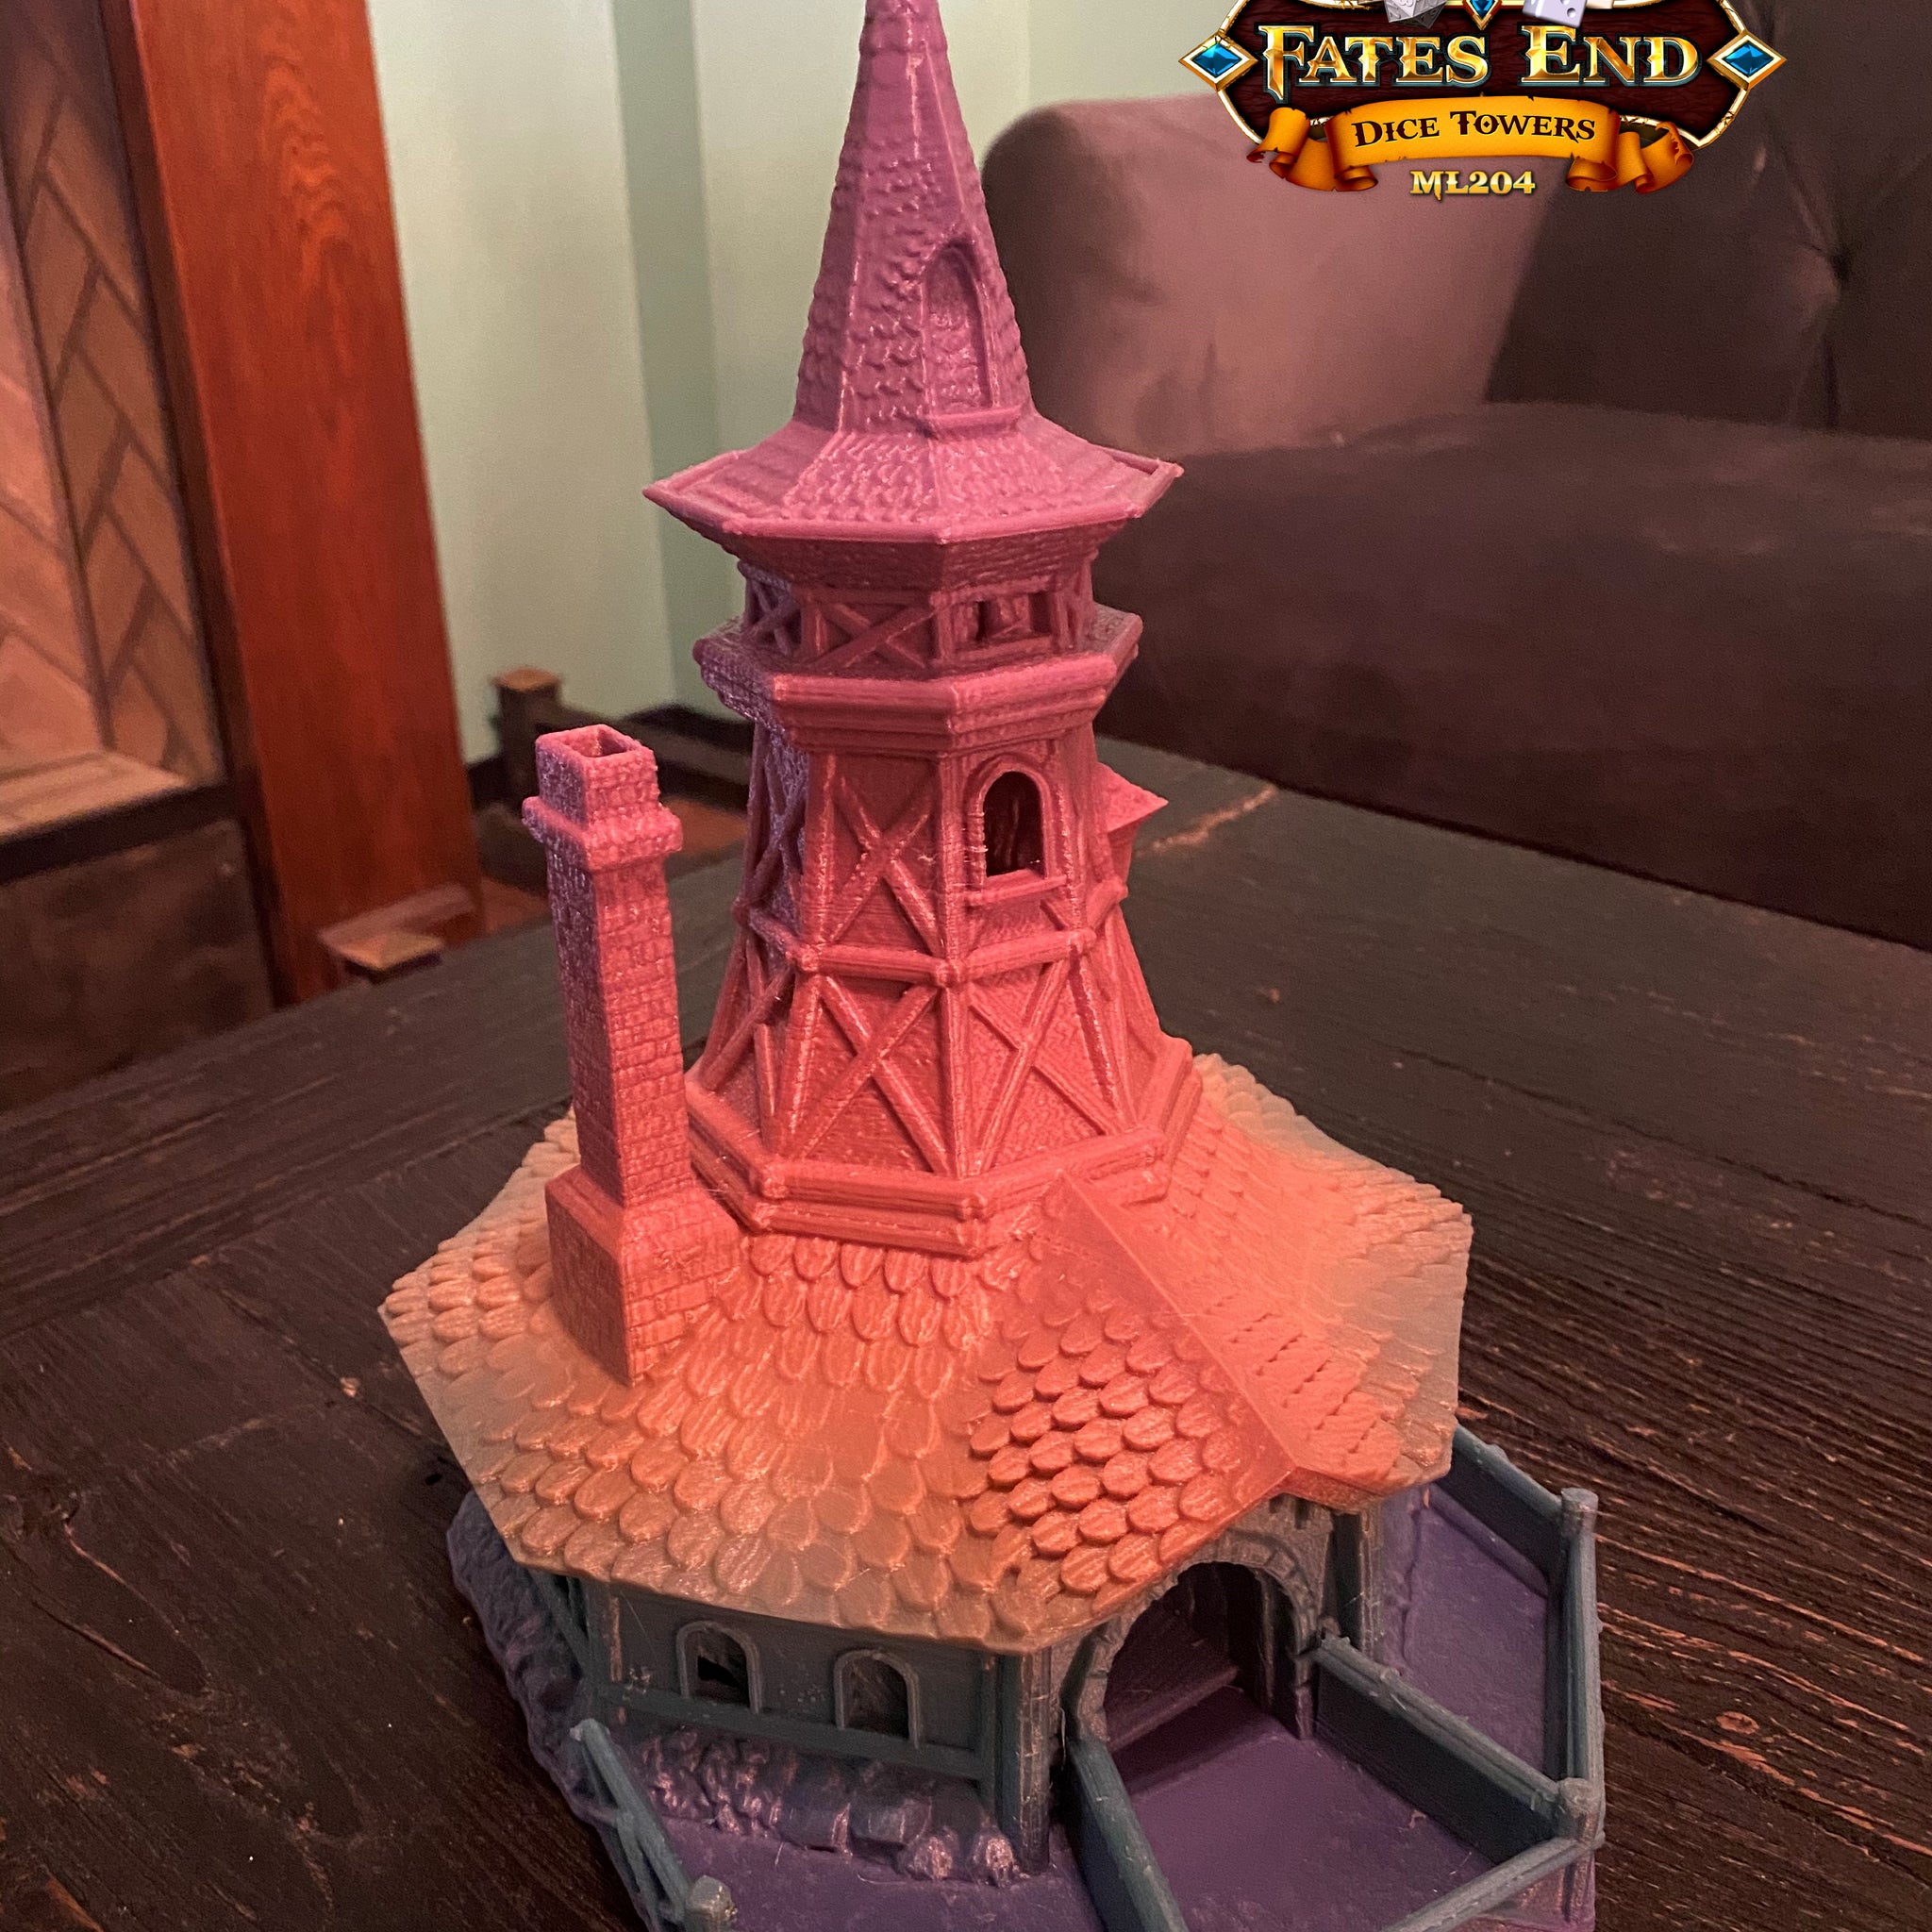 Fates End Bard Dice Tower